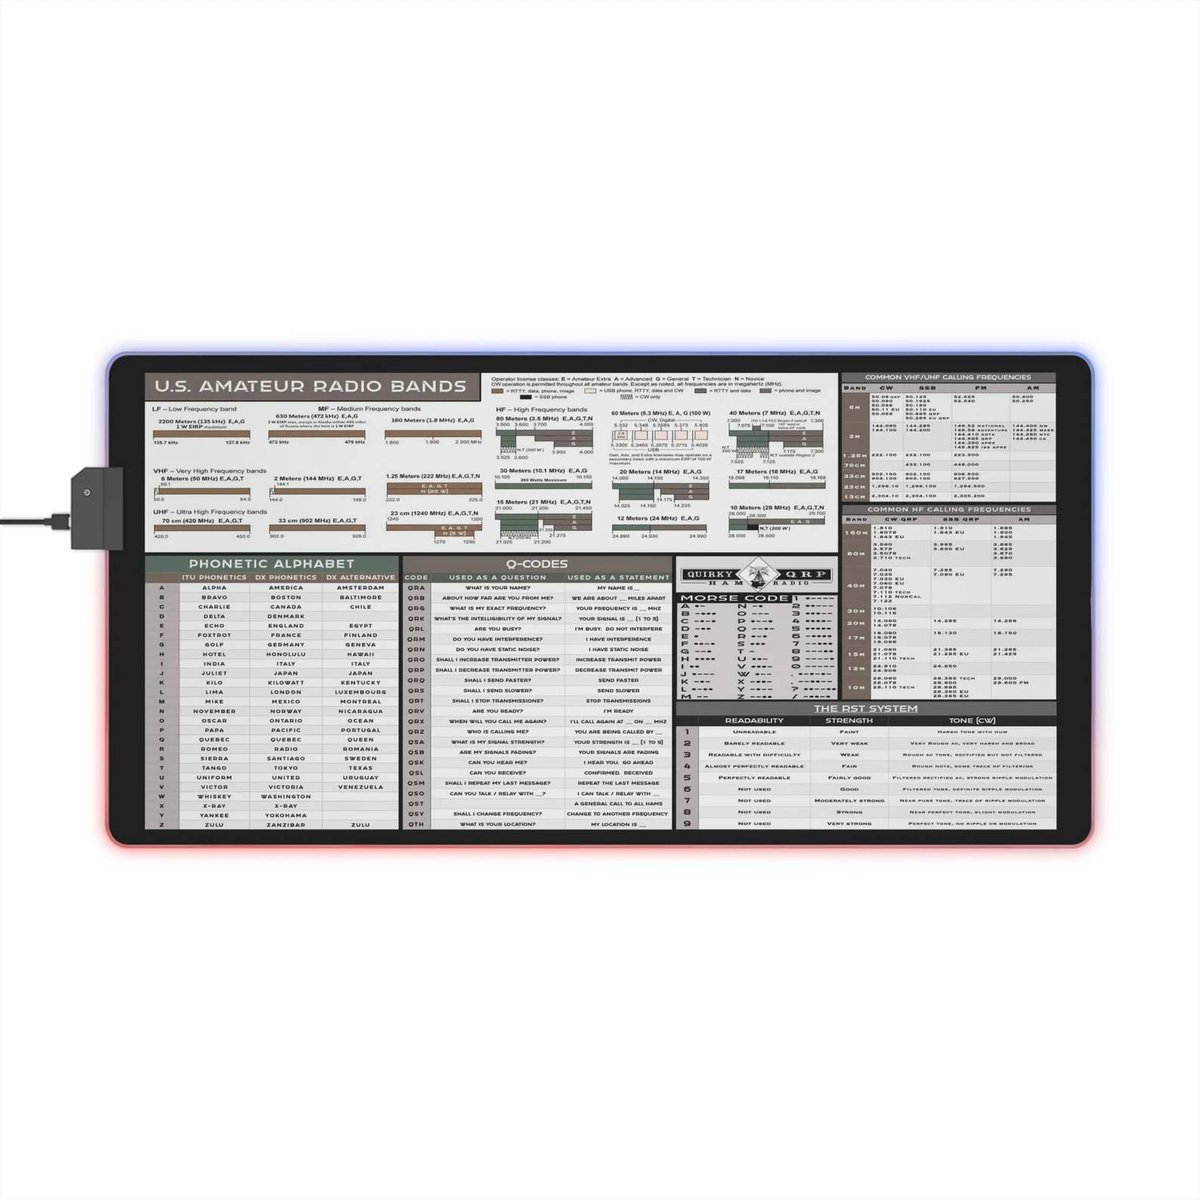 Quirkyqrp Ham Radios 🎟️

With the QuirkyQRP LED Ham Radio Shack Reference Mat on your desk you will always have immediate access to useful ham radio information such as: Amateur Radio band plan, HF/VHF/UHF Calling frequencies, Q-codes, Phonetic alphabet, RTS signal report guide,